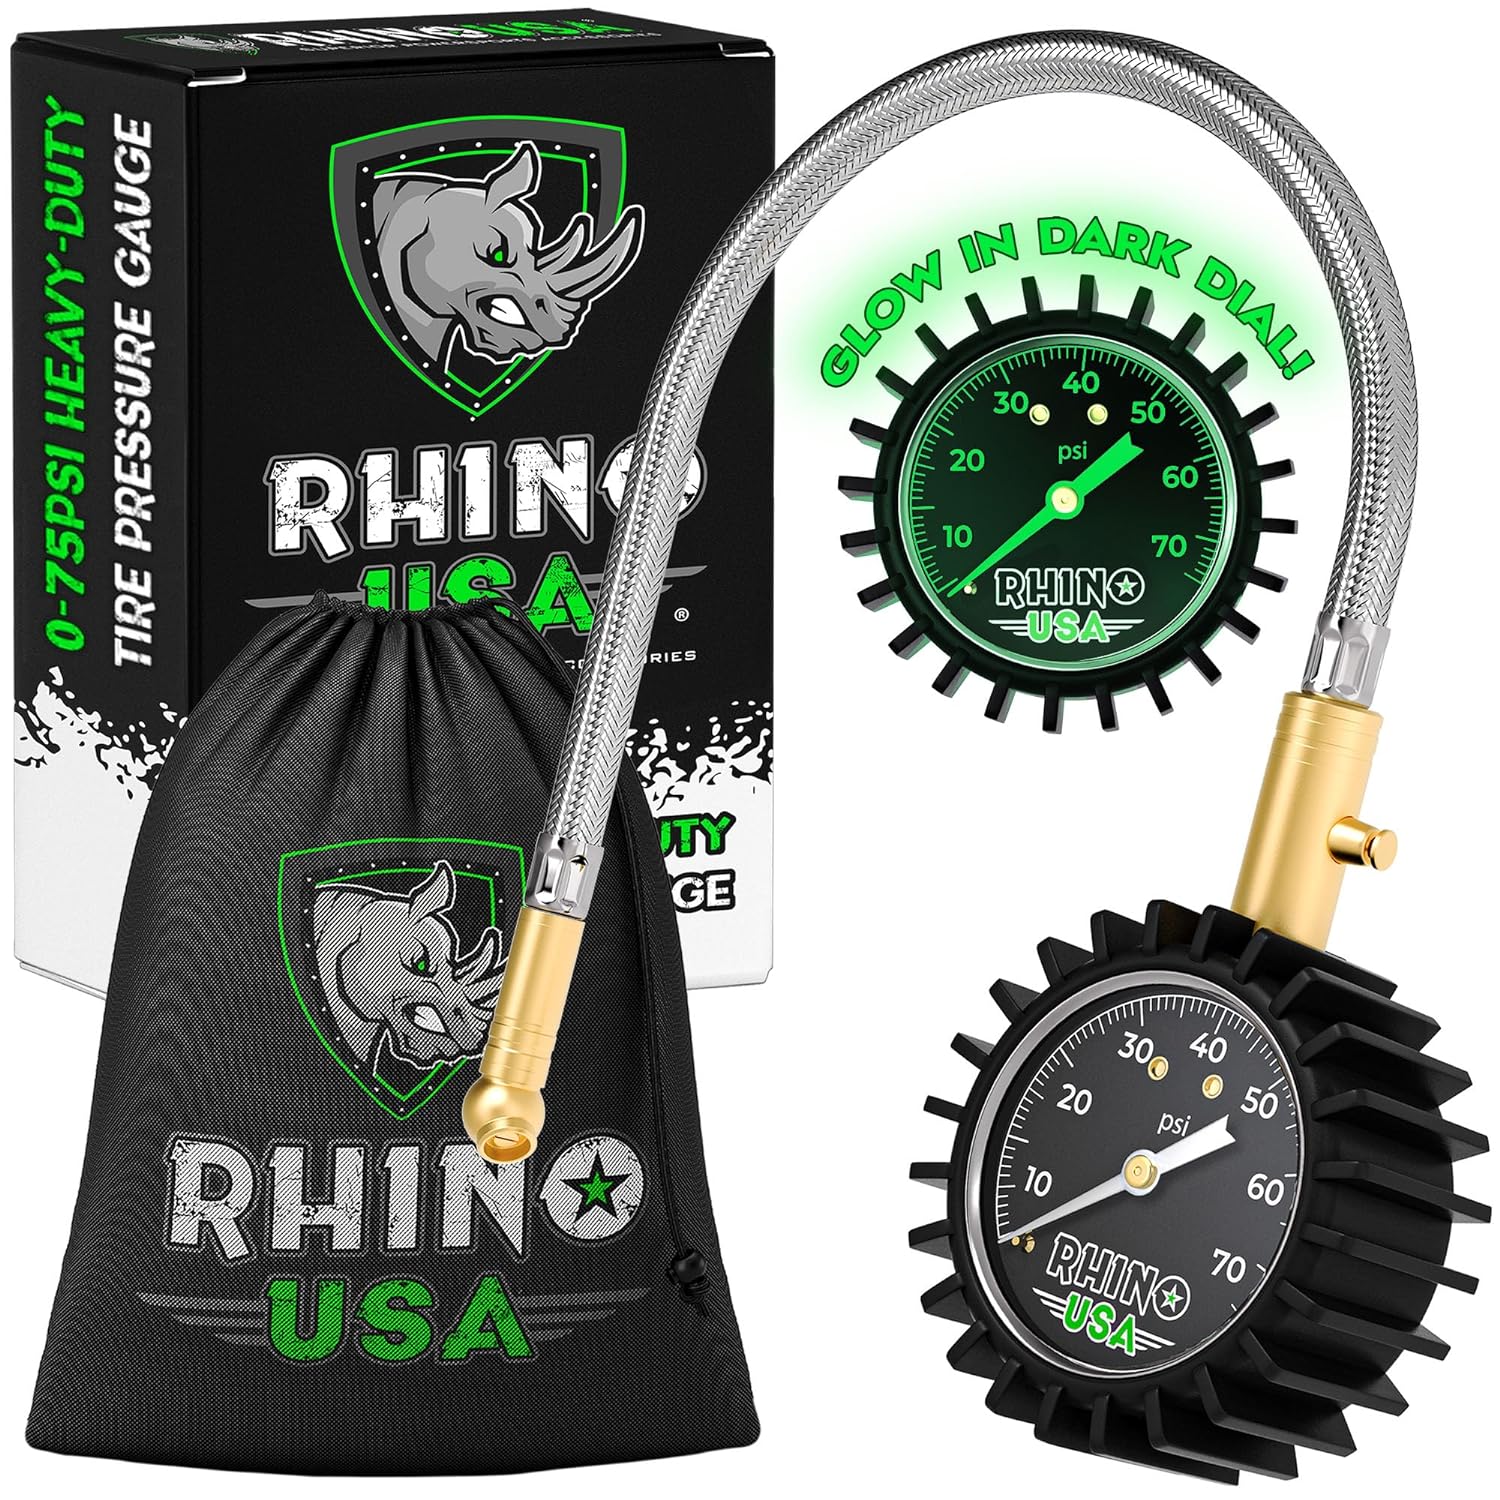 Rhino USA Heavy Duty Tire Pressure Gauge (0-75 PSI) - Certified ANSI B40.1 Accurate, Large 2 Easy Read Glow Dial, Premium Braided Hose, Solid Brass Hardware, Best for Any Car, Truck, Motorcycle, RV